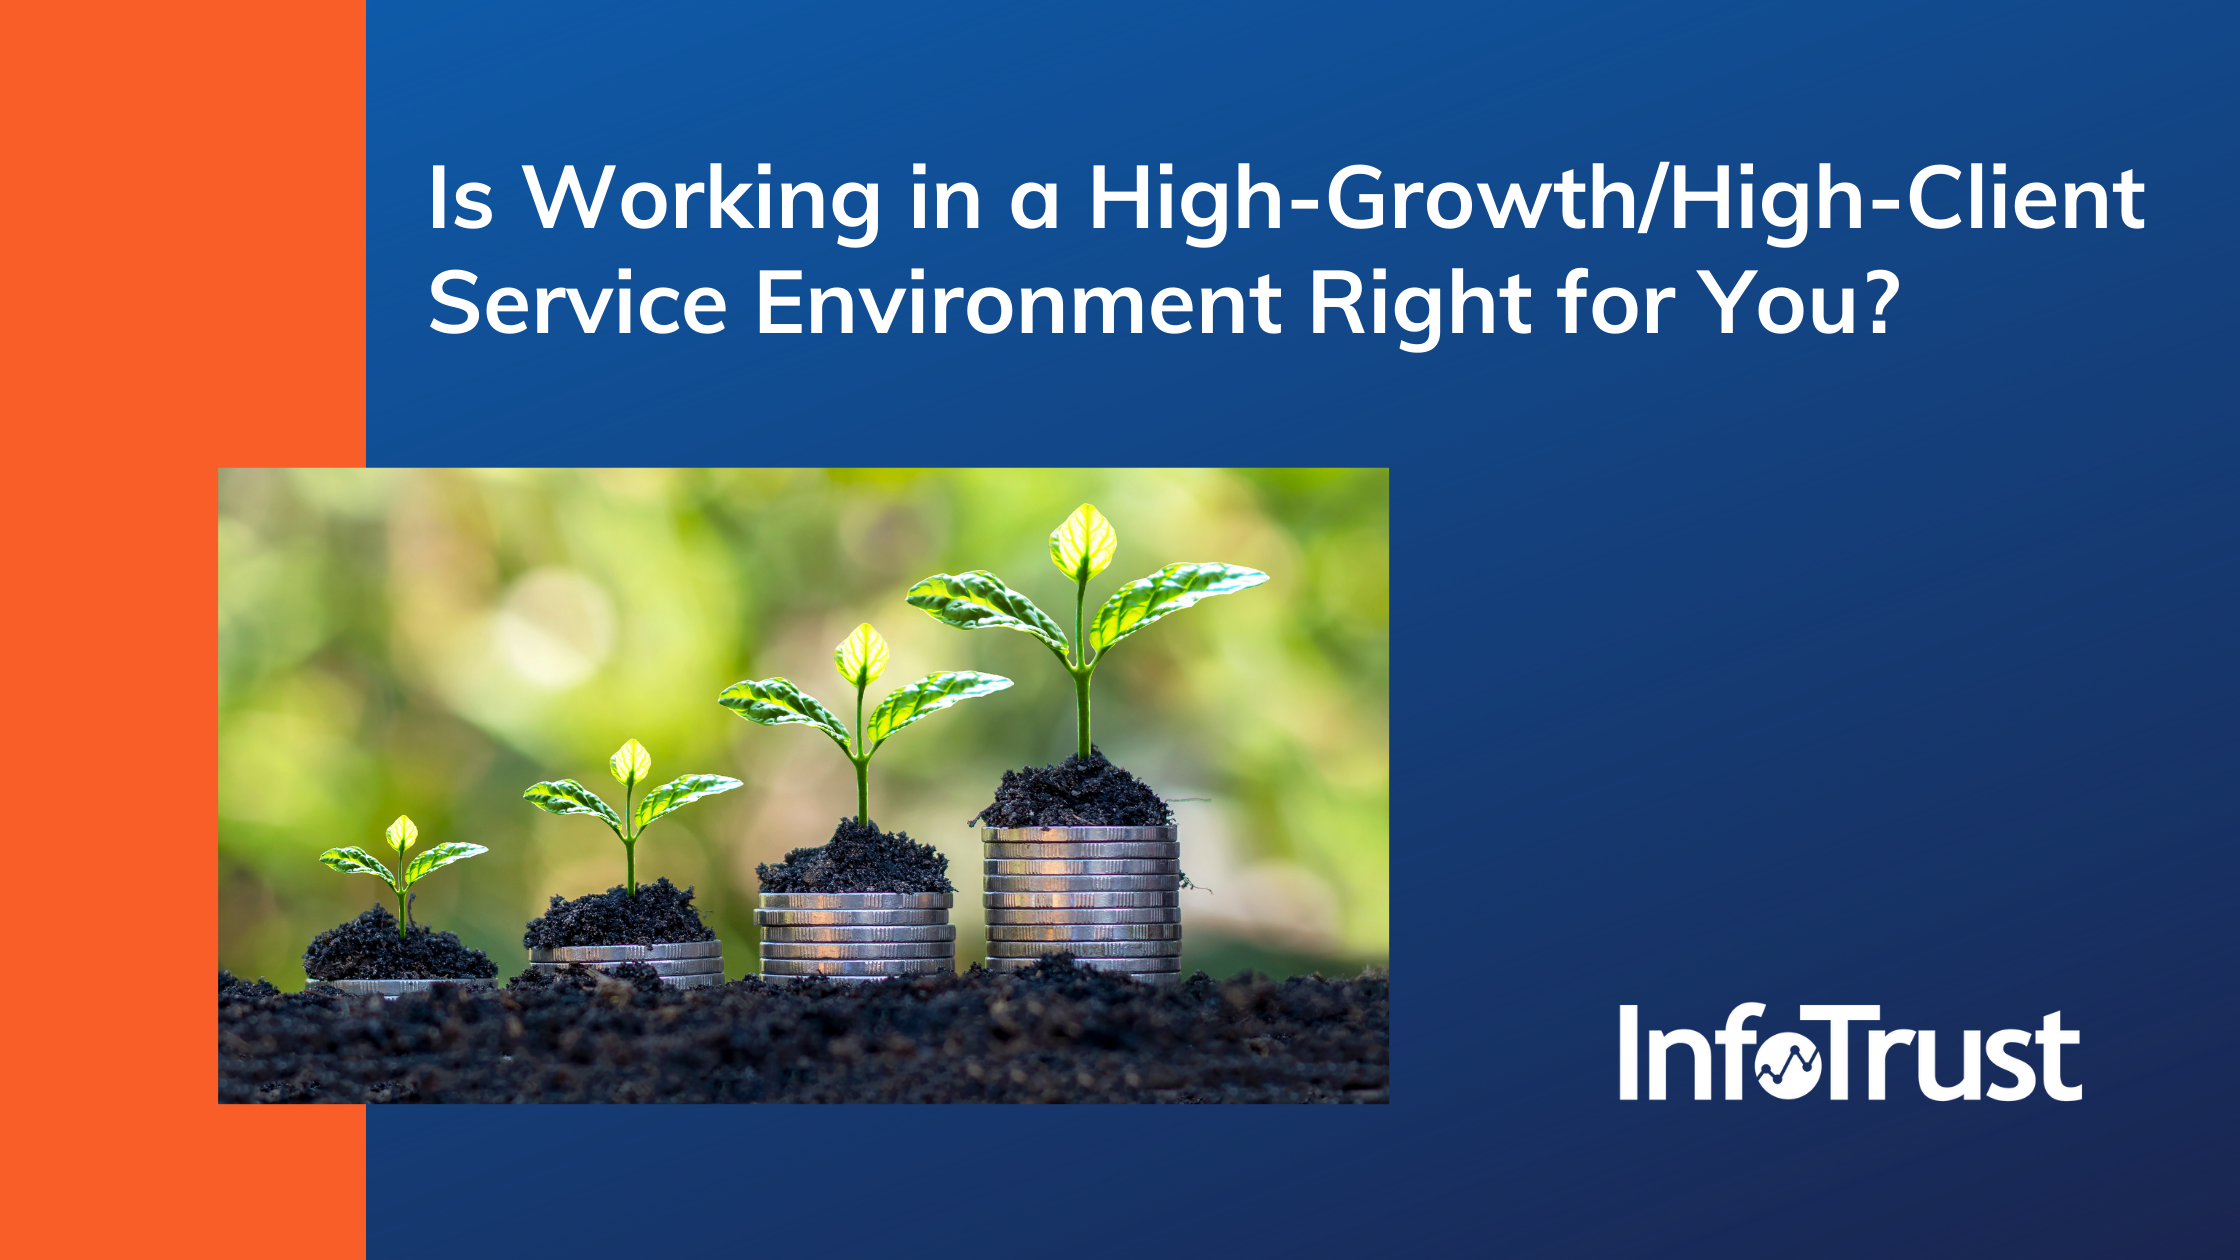 Is Working in a High-Growth/Client Service Environment Right for You?